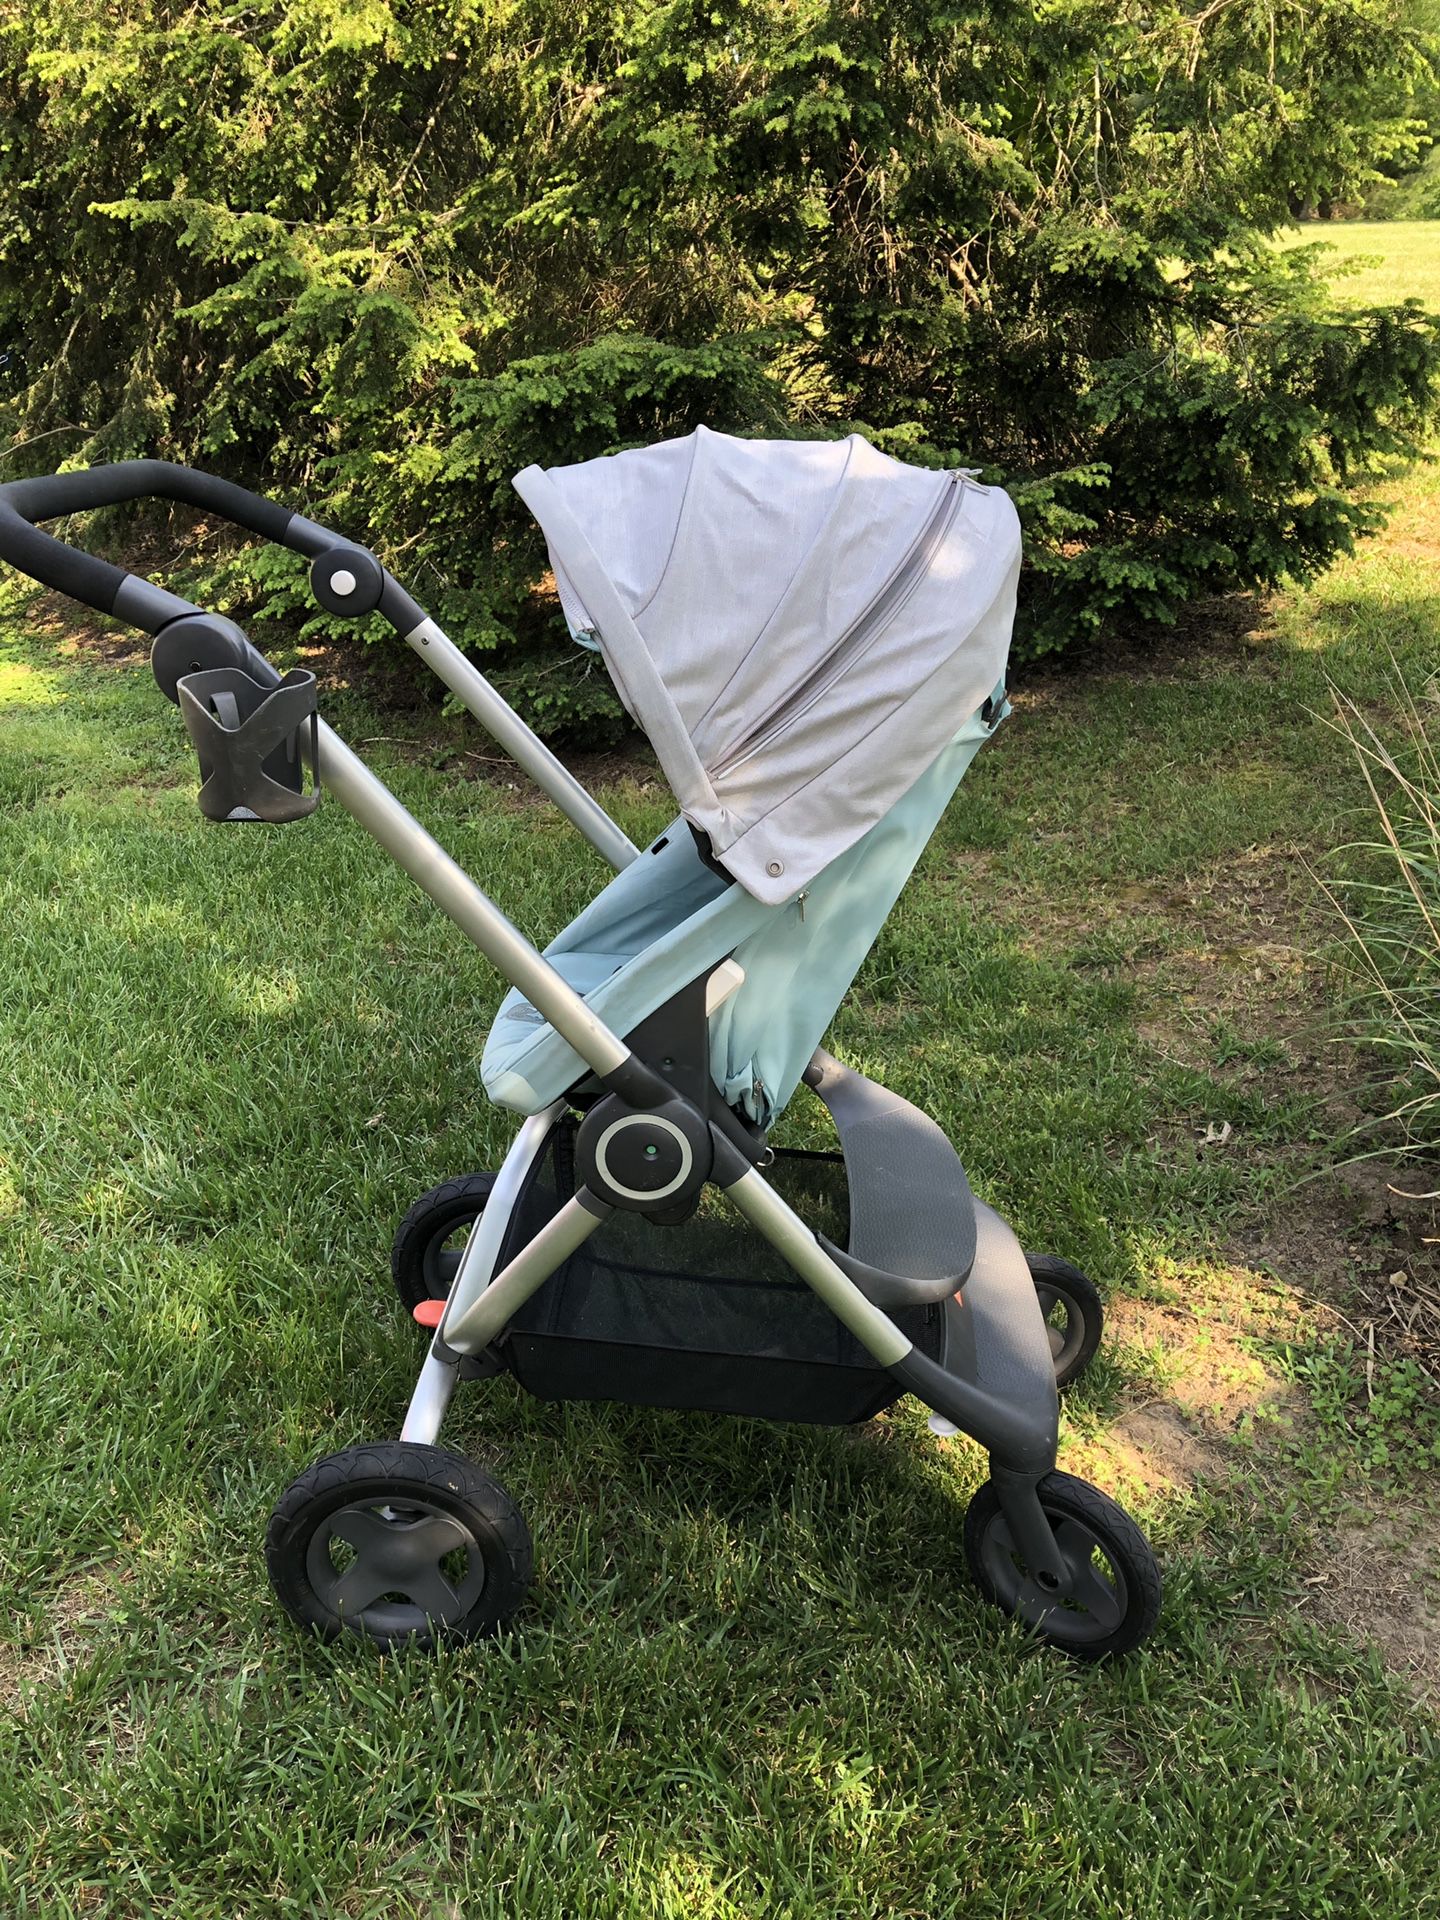 Stokke Scoot Stroller Used light blue/aqua/teal and gray ($699 new)